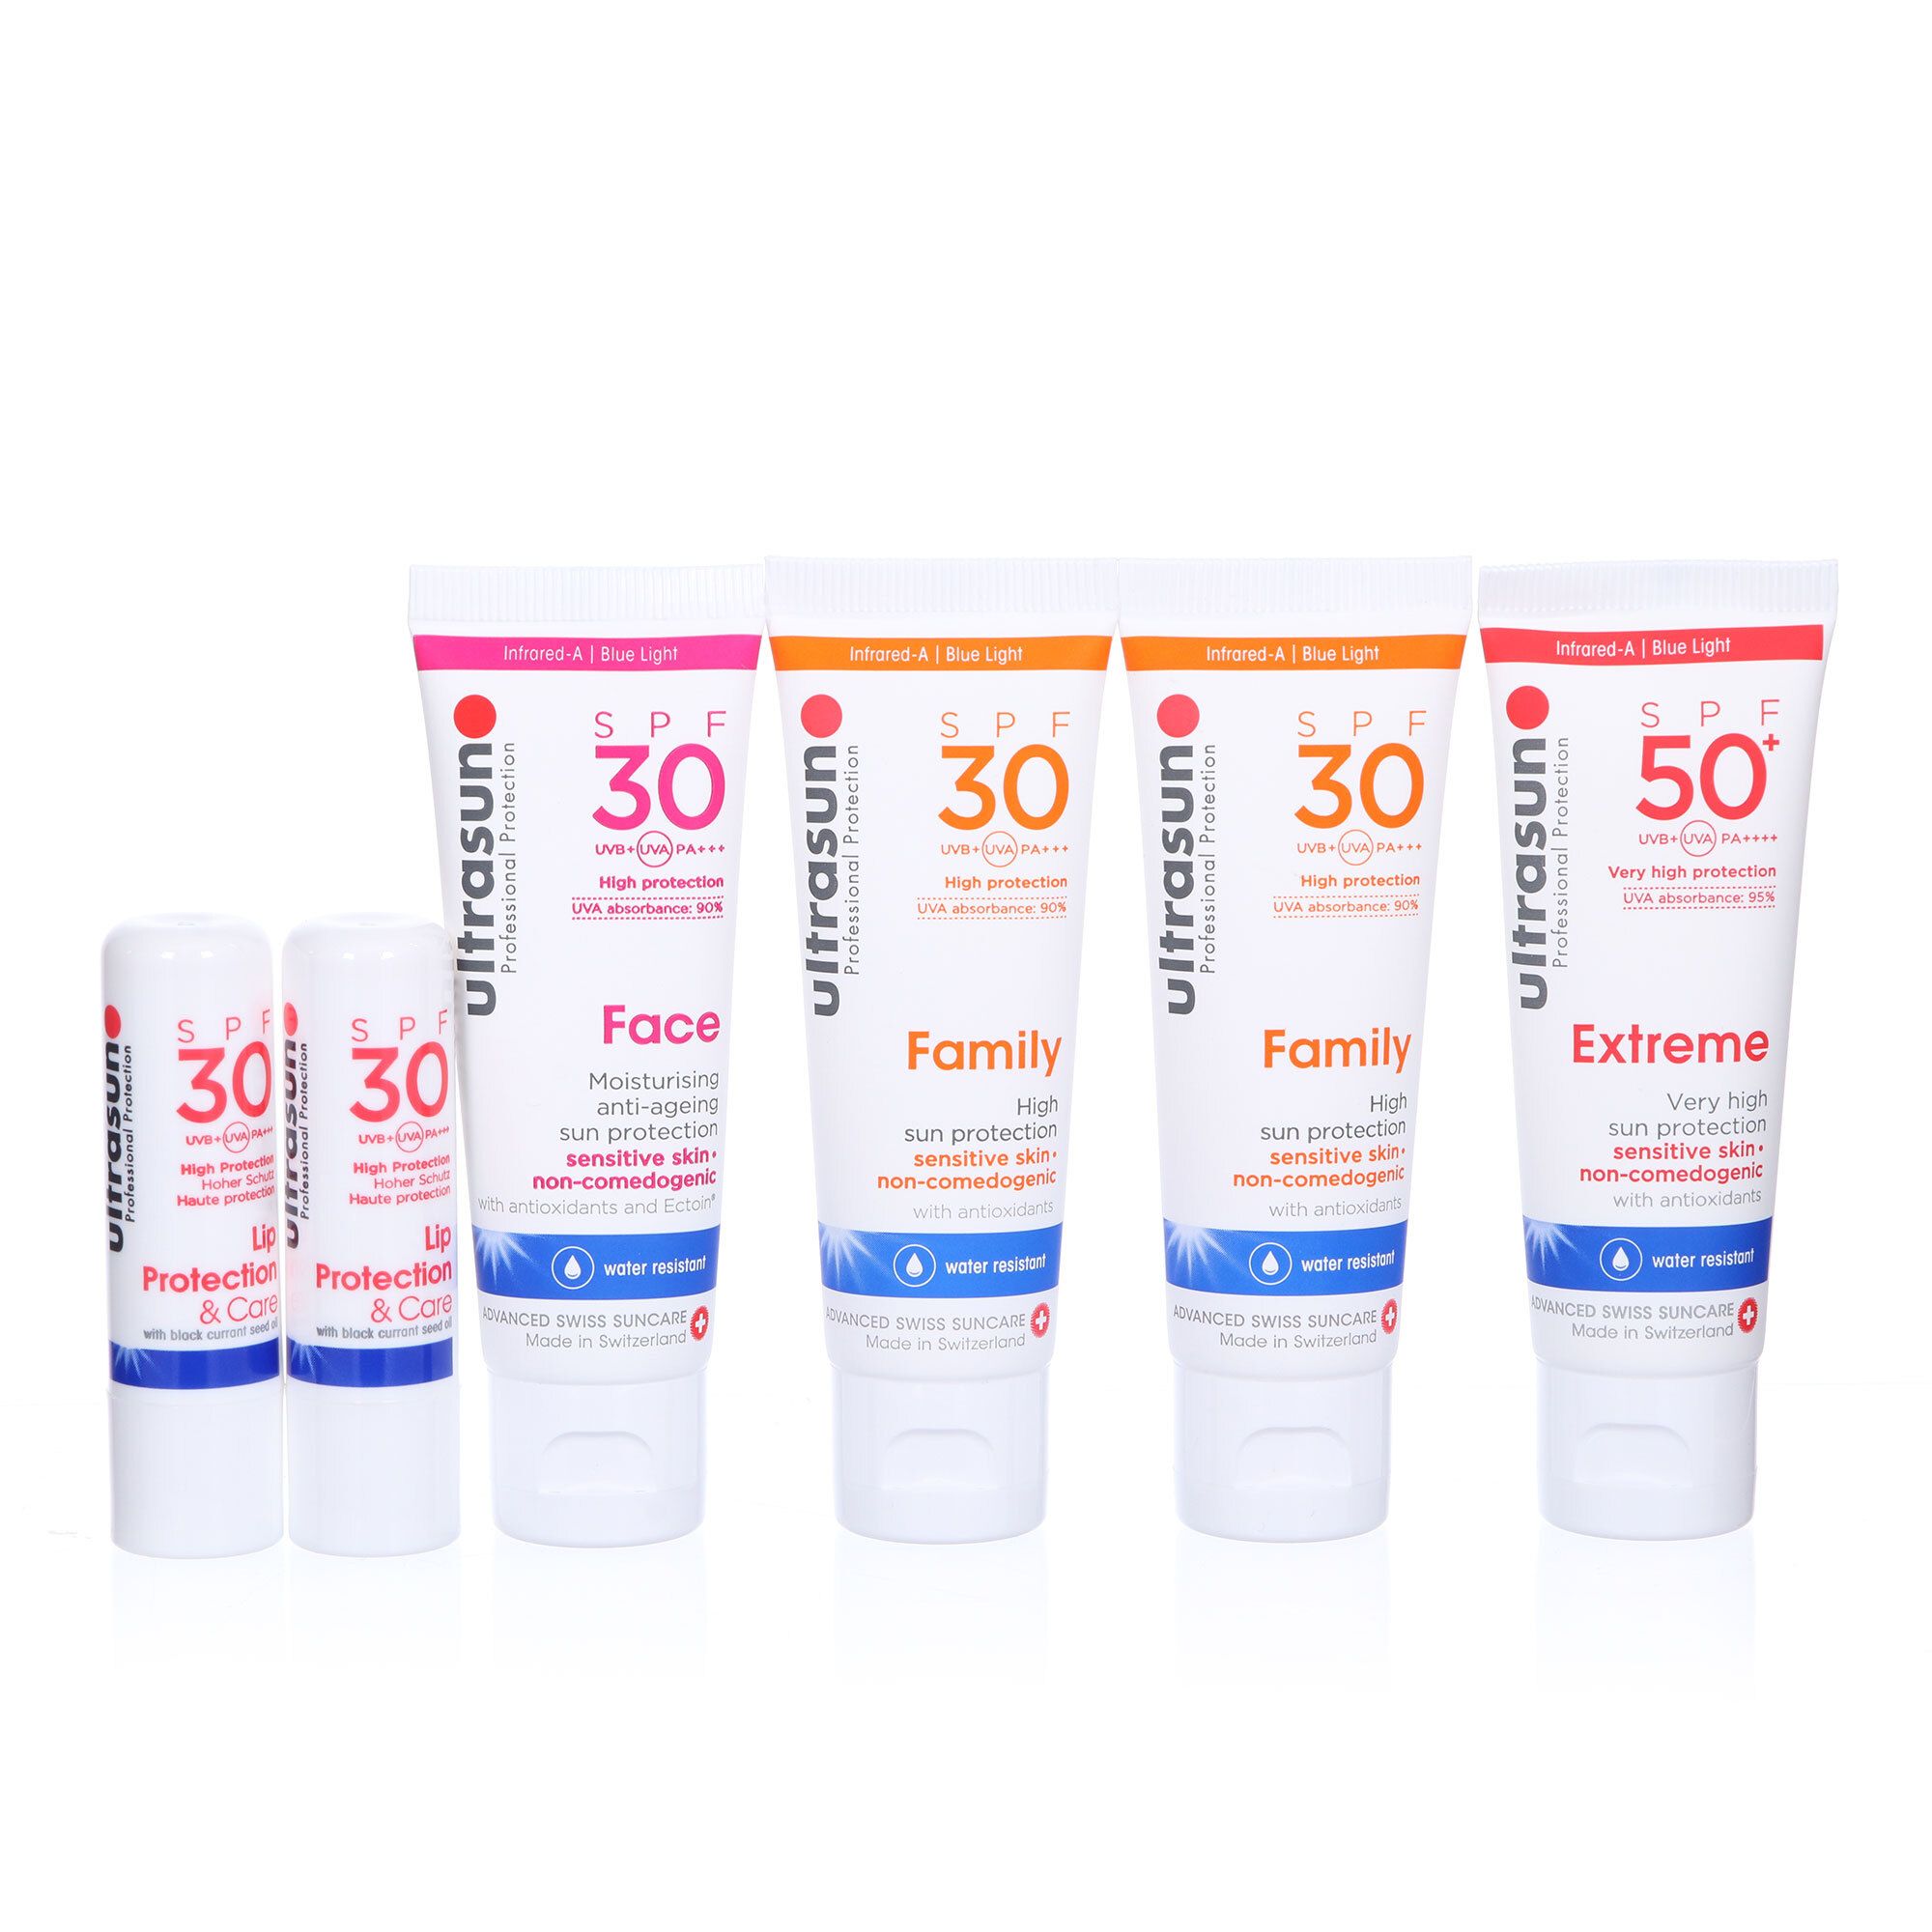 Image of Face SPF30, 2Family SPF30, Extreme SPF50, 2Lip Protect SPF30